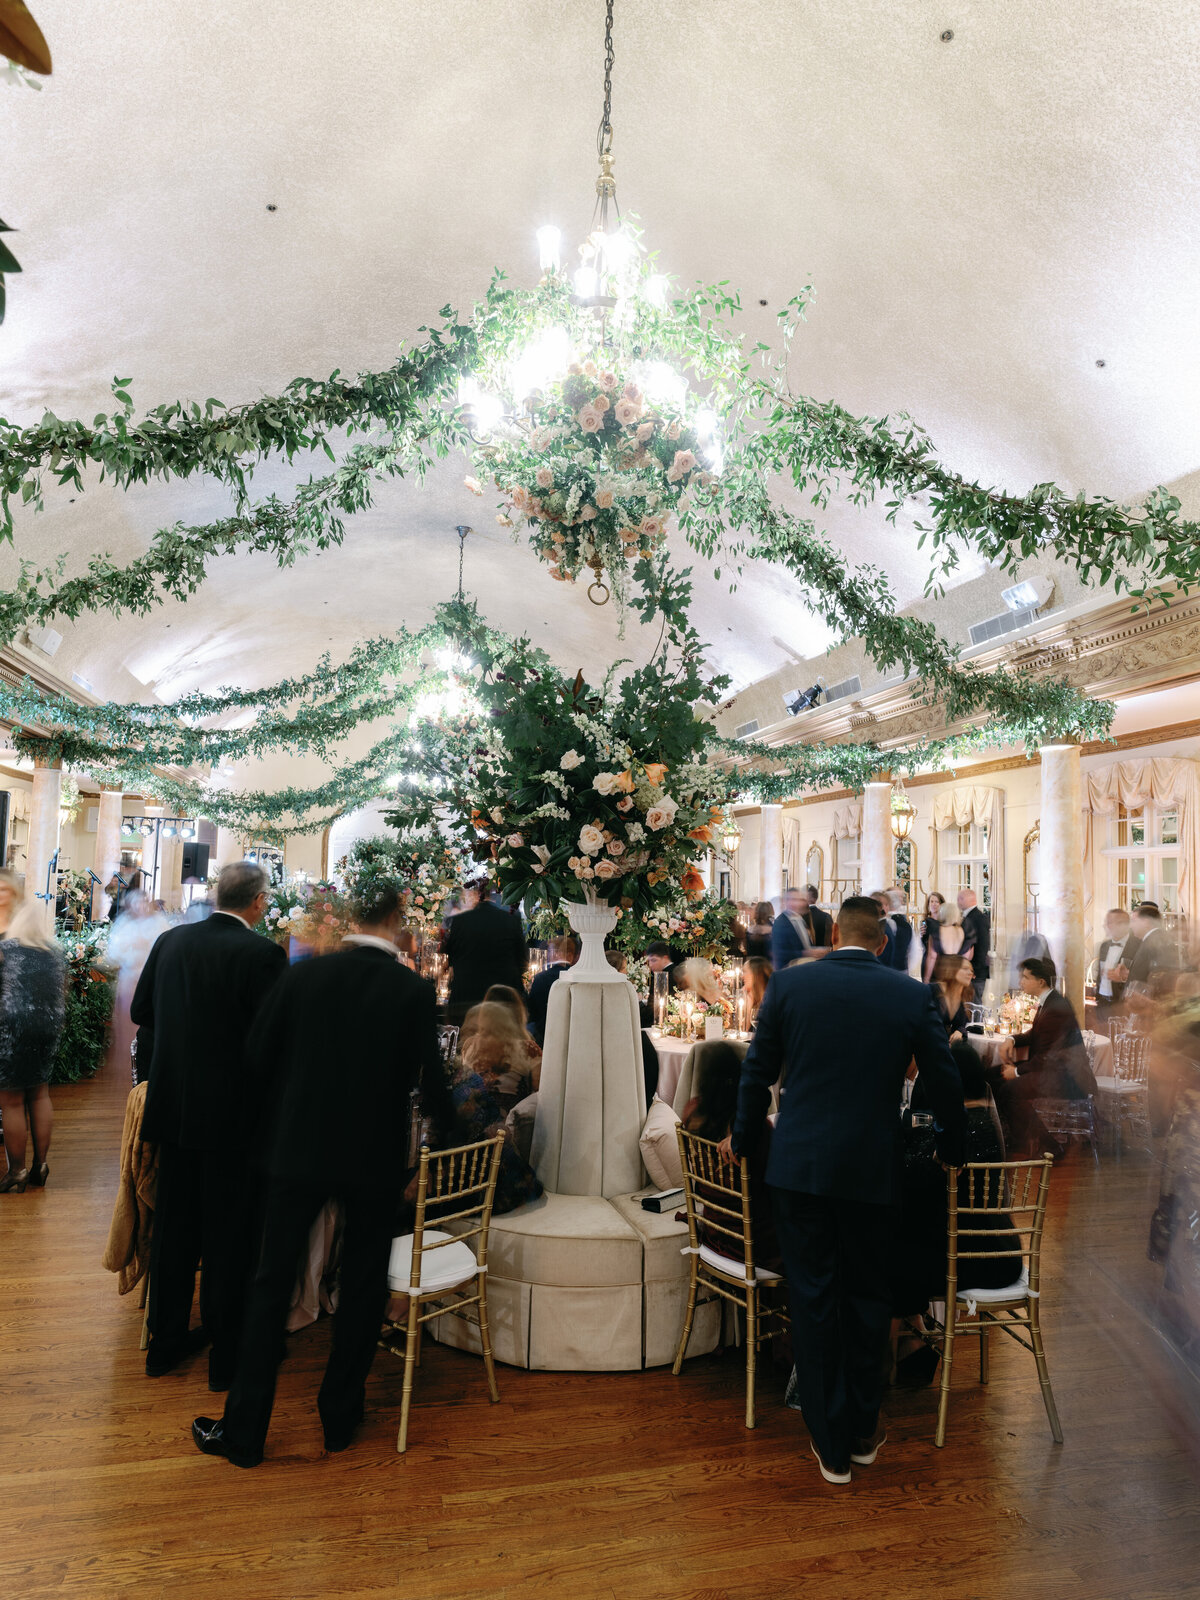 Whitney Bowman Events Knoxville Tennessee Wedding Planner Planning Destination Southern Weddings Florida 30A Alabama Luxury Event Destination Weddings MaggieSpencerWedding_Knoxville_2022_@benfinch_FinchPhoto-298